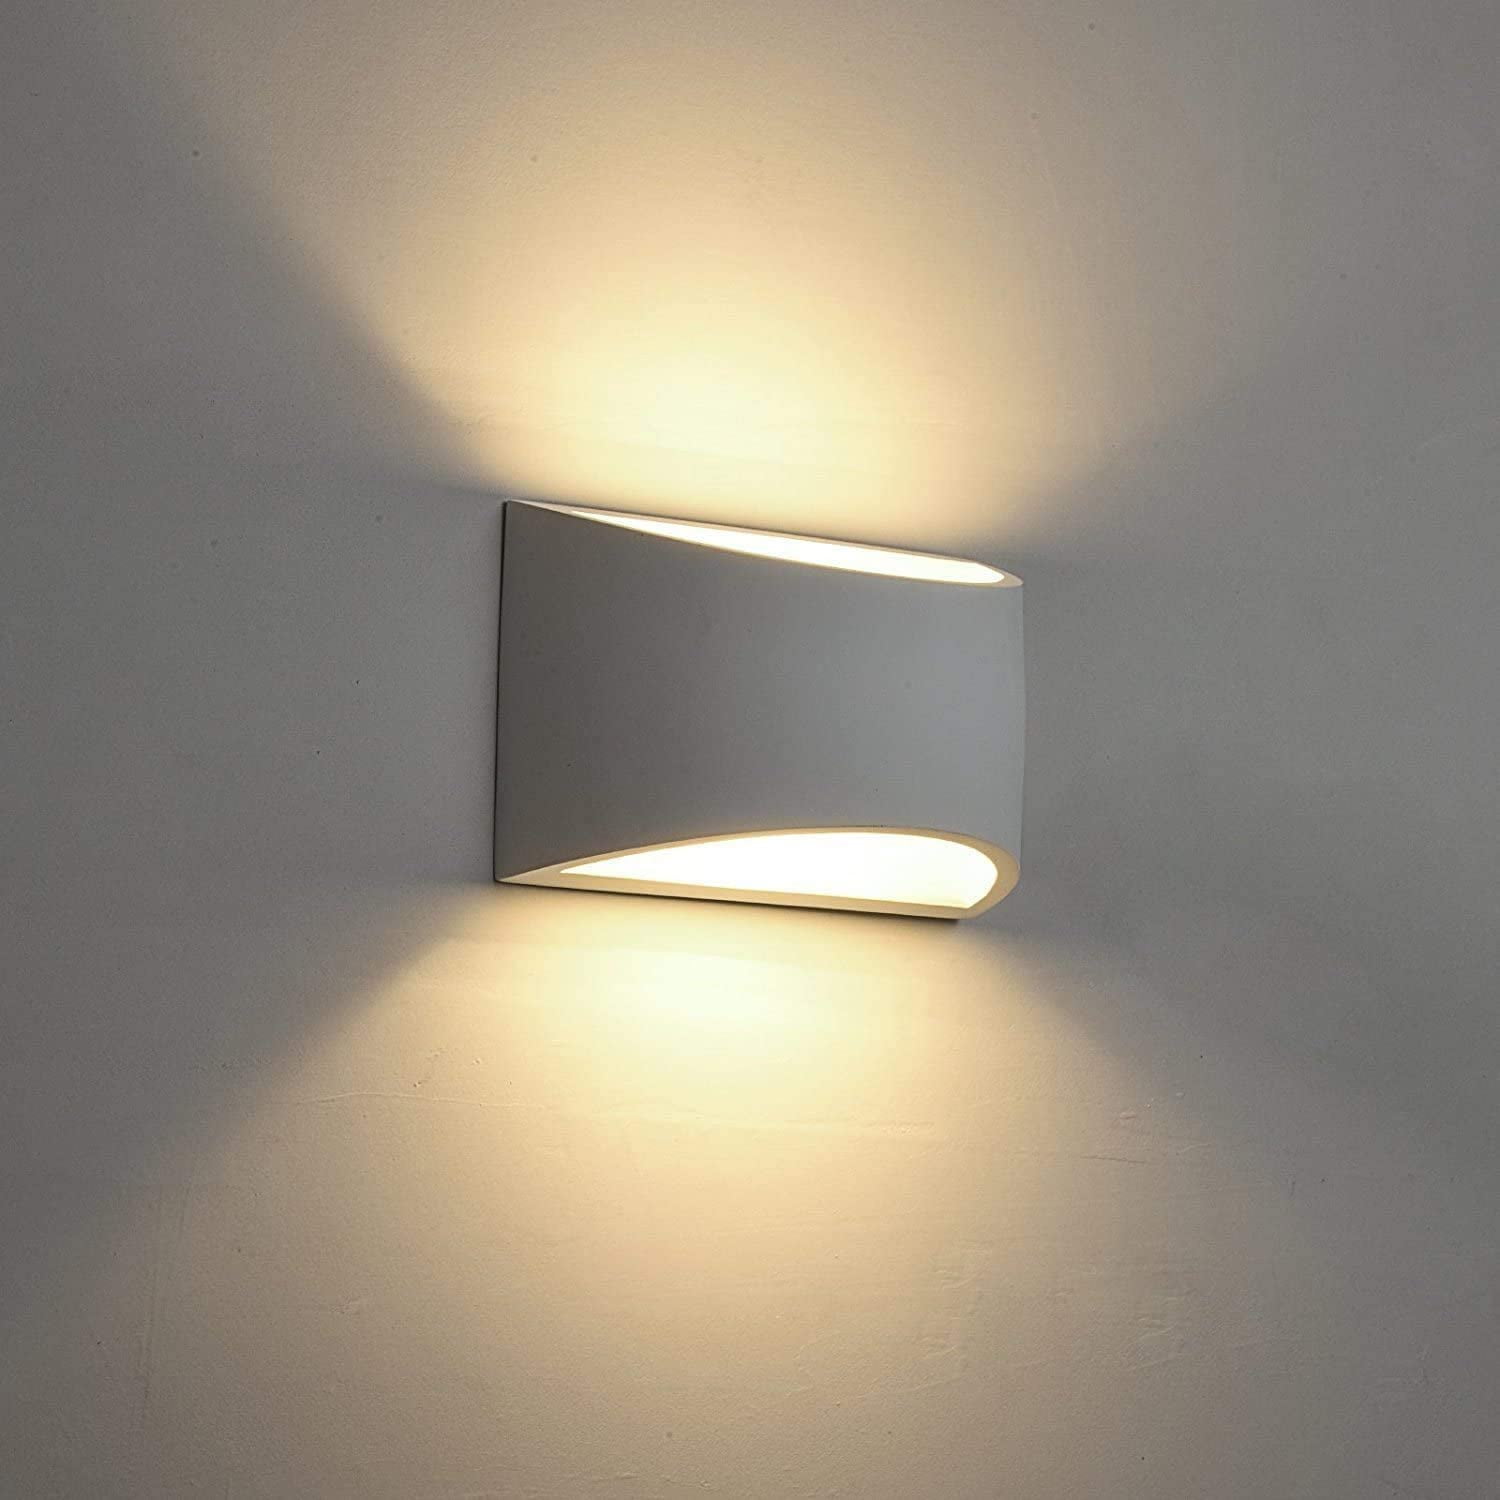 DECKEY Wall Light LED Up and Down Indoor Lamp Uplighter Downlighter Warm White 